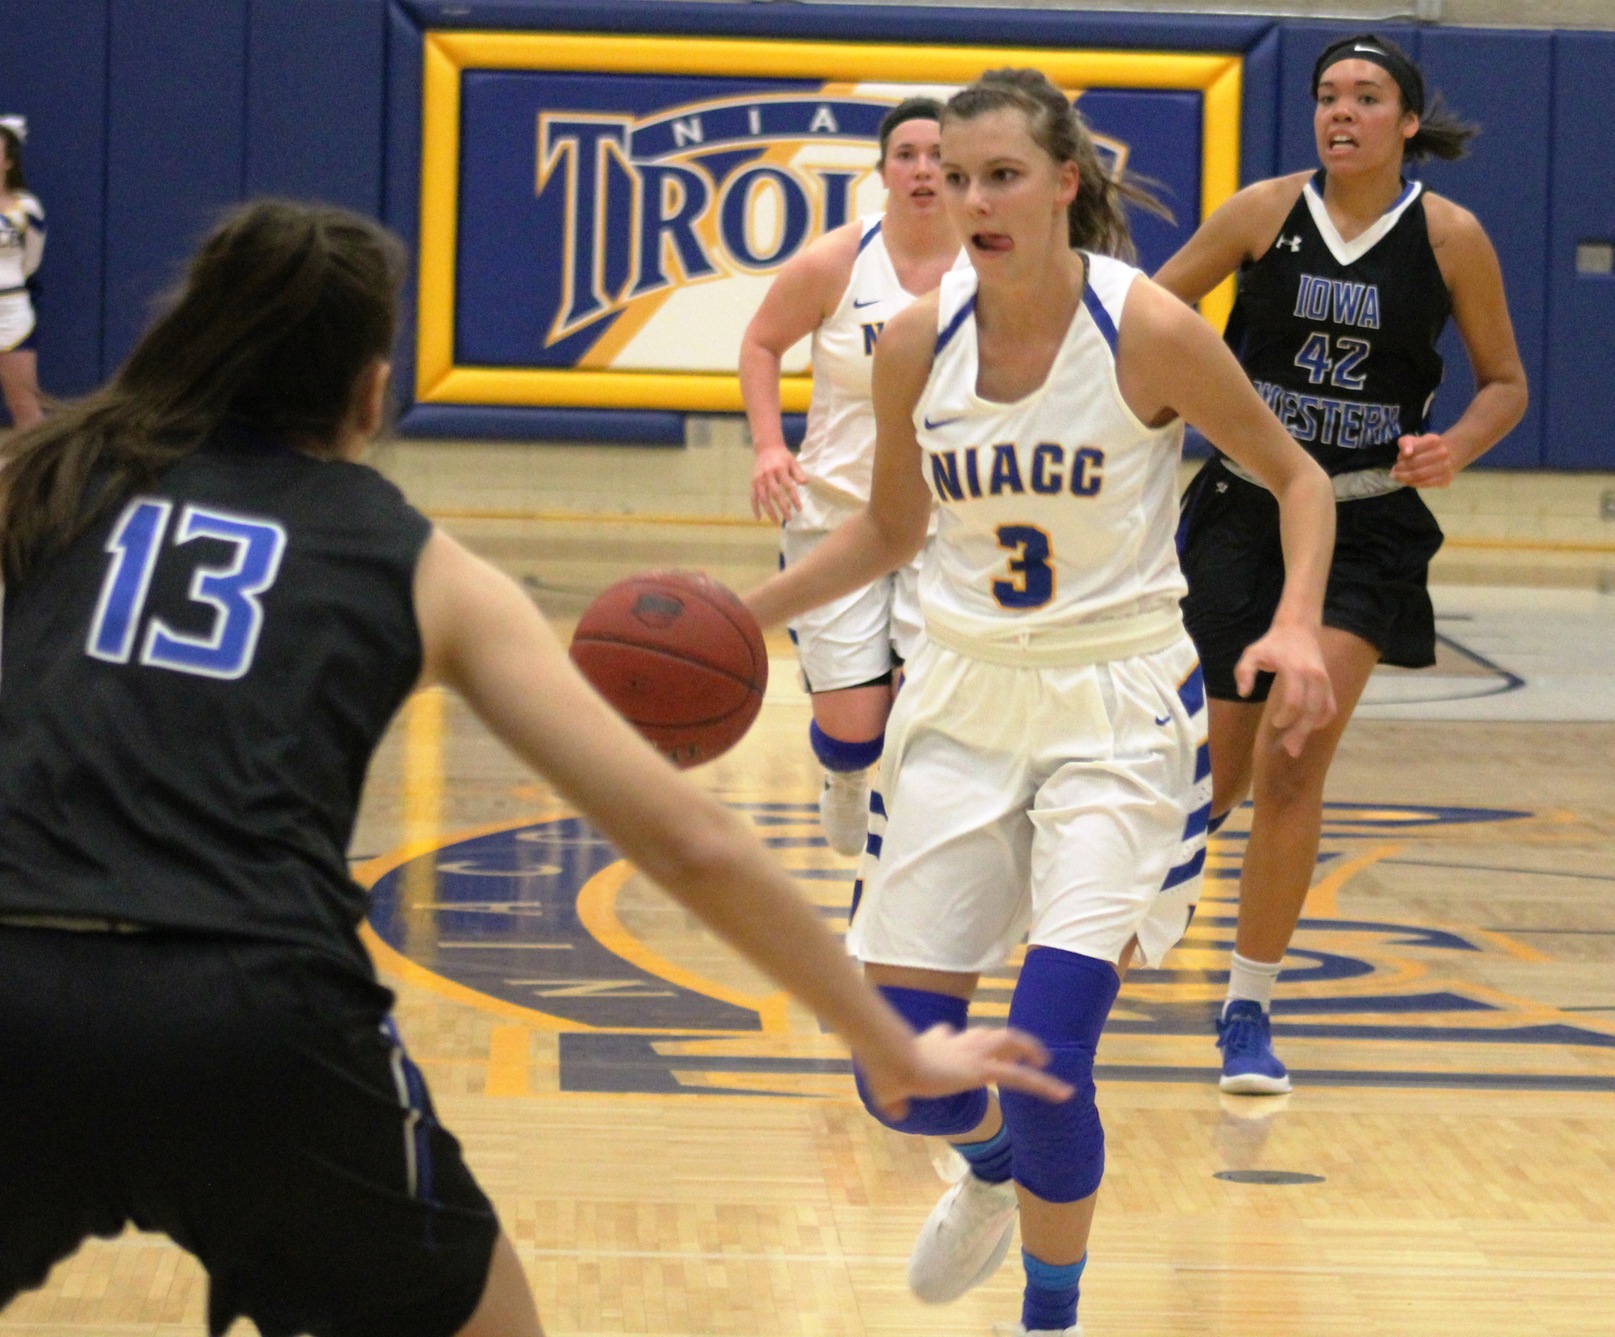 Taylor Laabs drives the ball to the basket in last Saturday's game against Iowa Western.